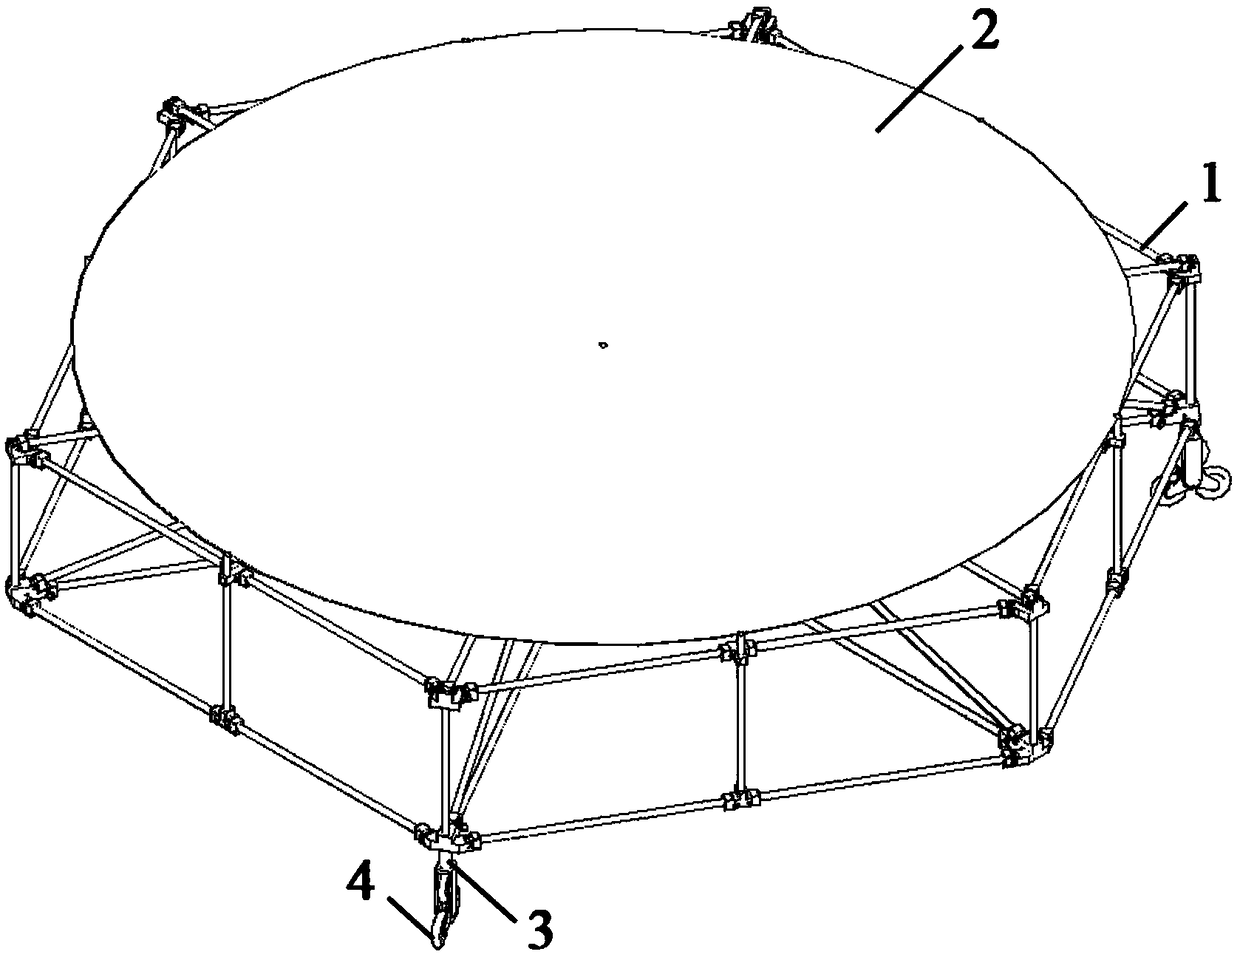 Lunar-based expandable truss-type network cable reflection-surface antenna